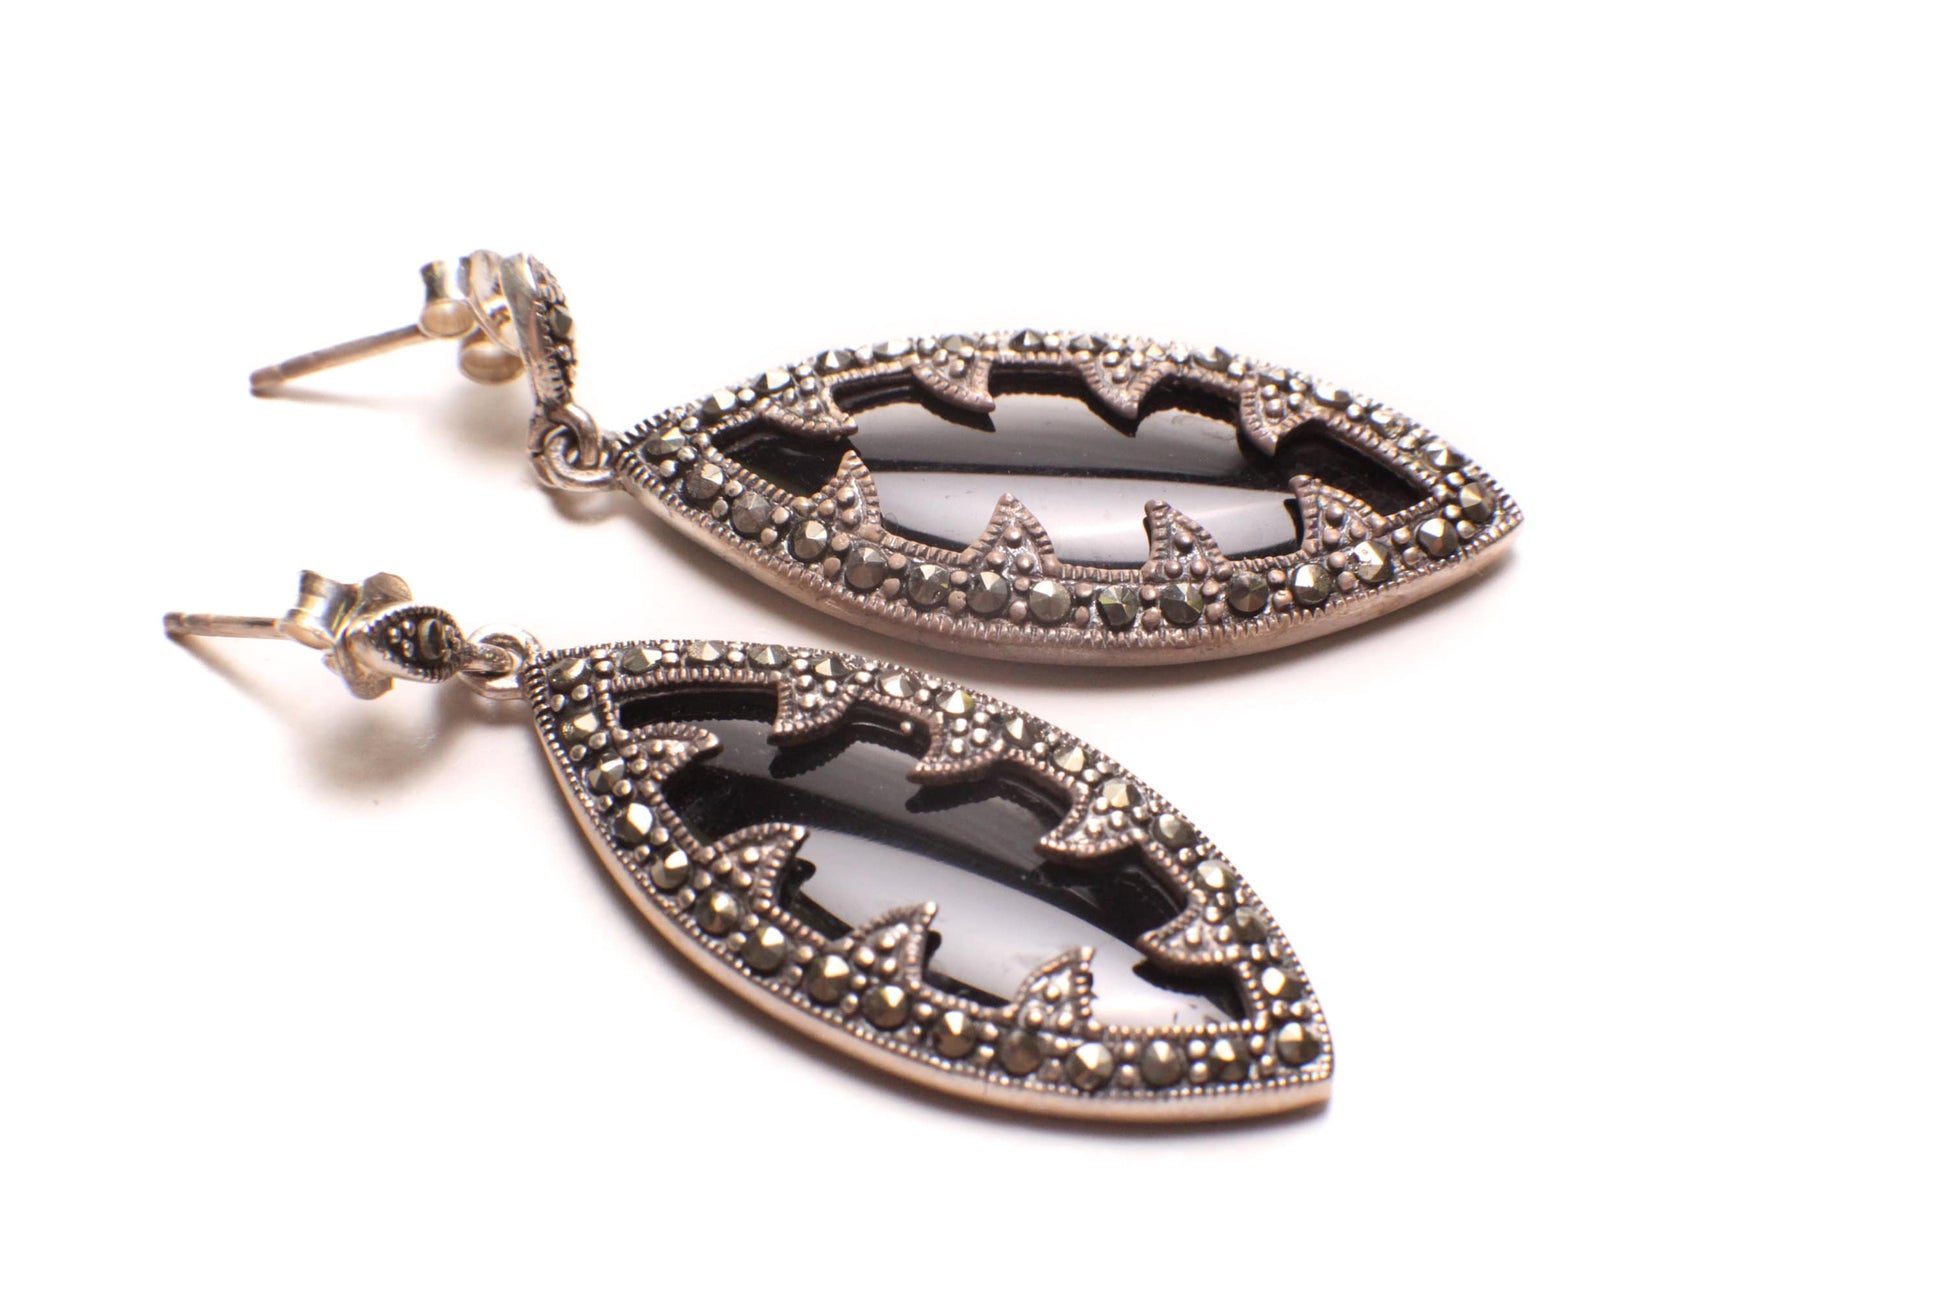 Black Onyx 15x30mm Oval with 925 Sterling Silver Marcasite Earrings Post, Vintage, Antique Marcasite Earrings Gift for her